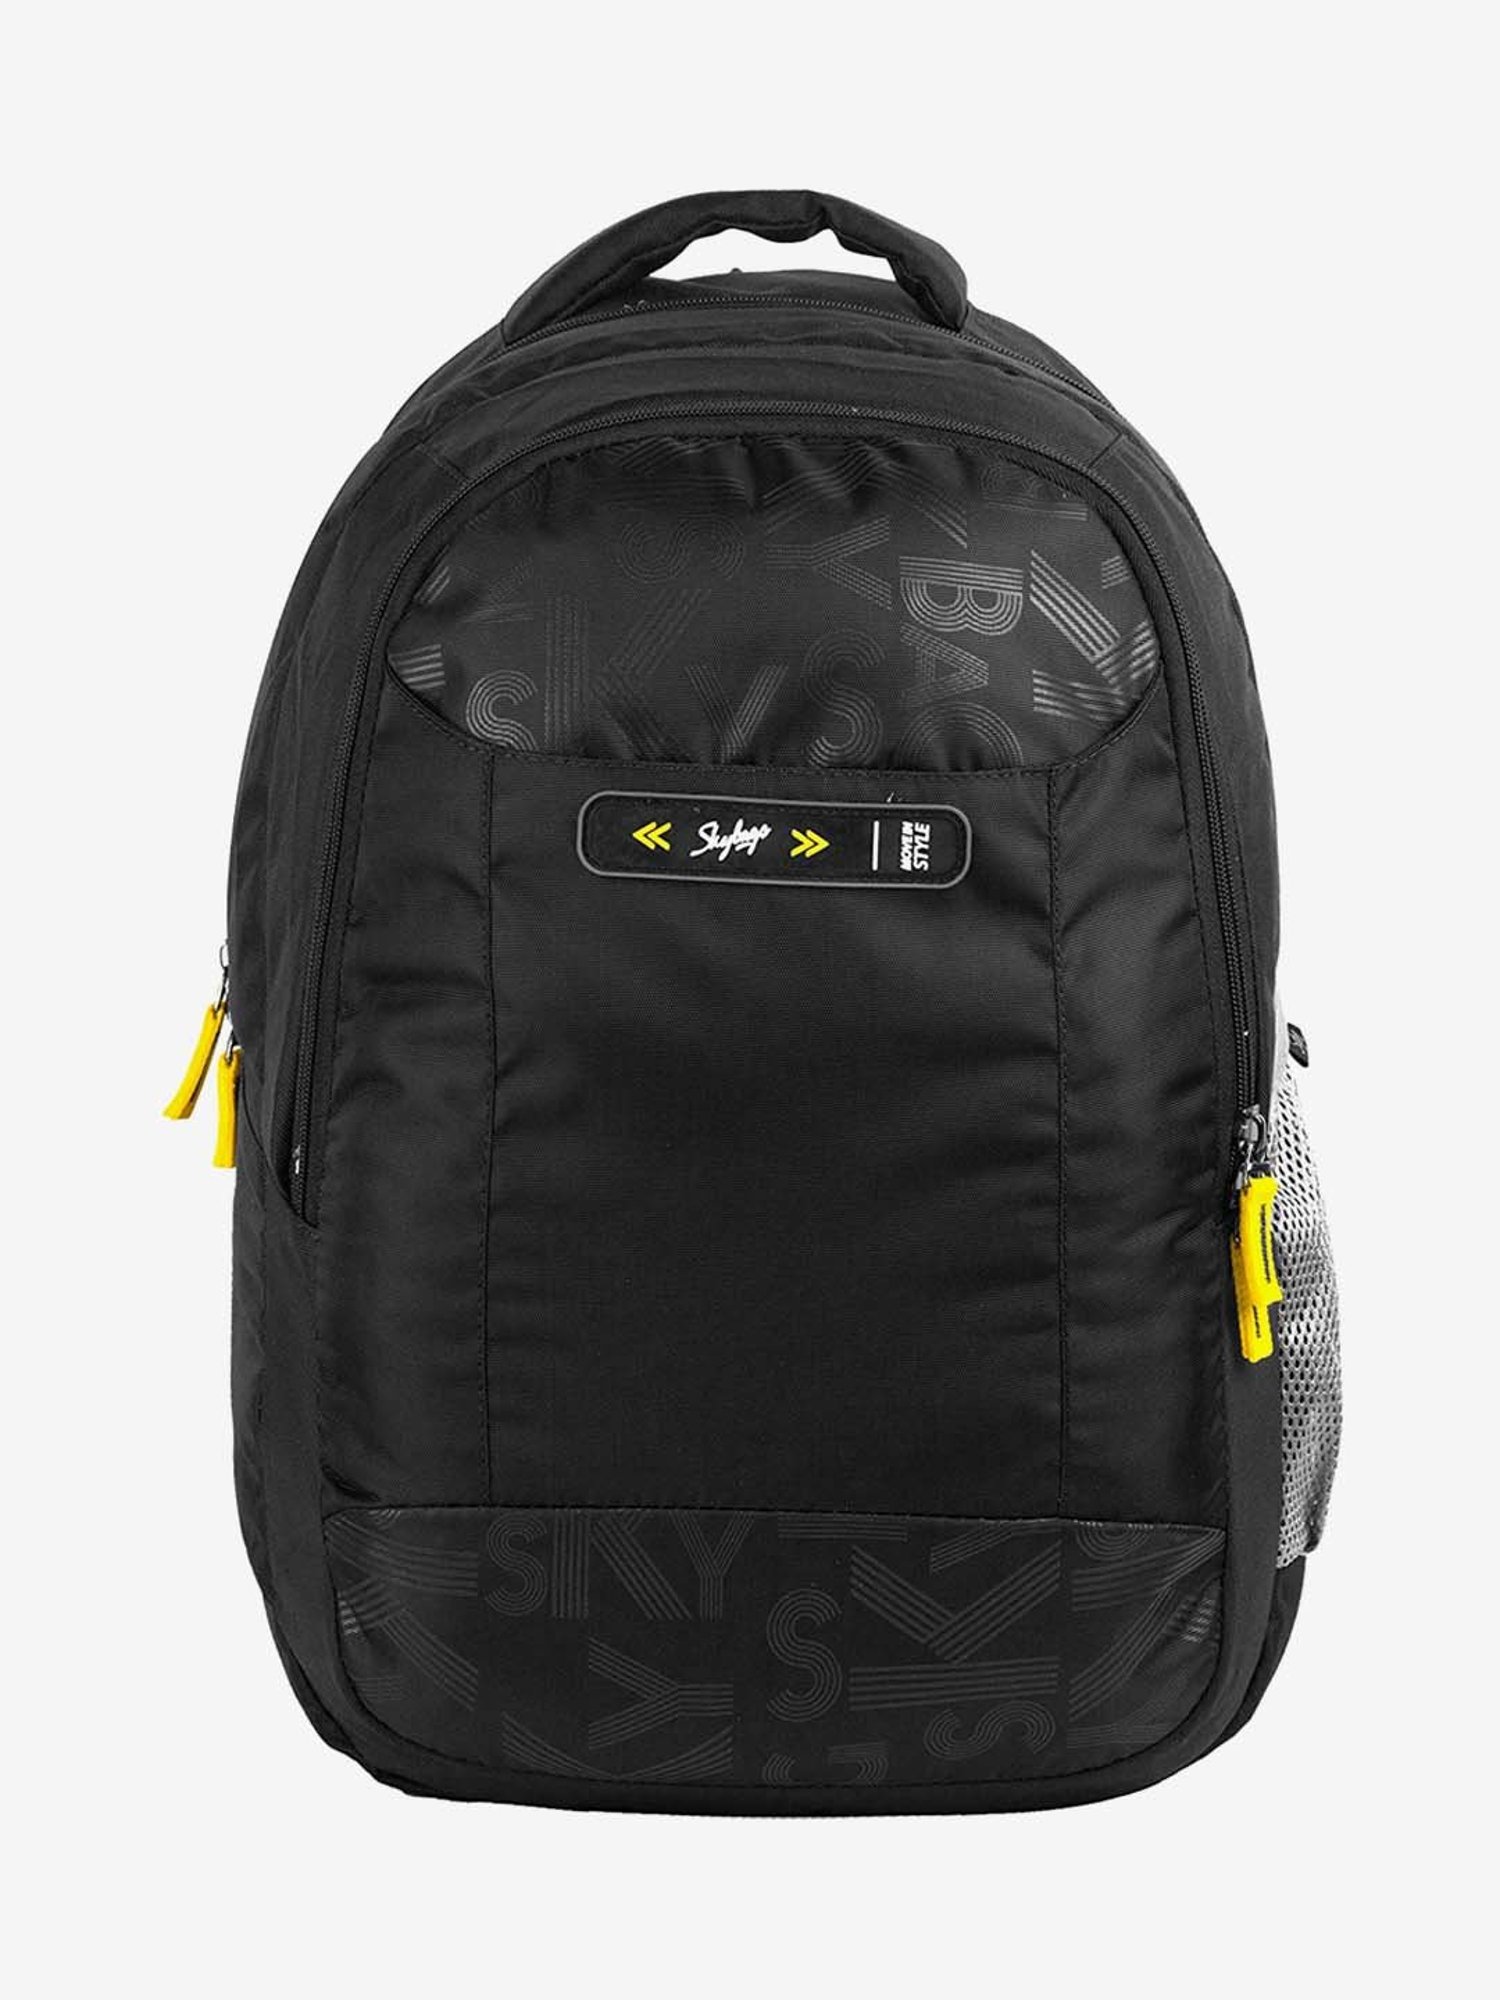 skybags arthur laptop backpack